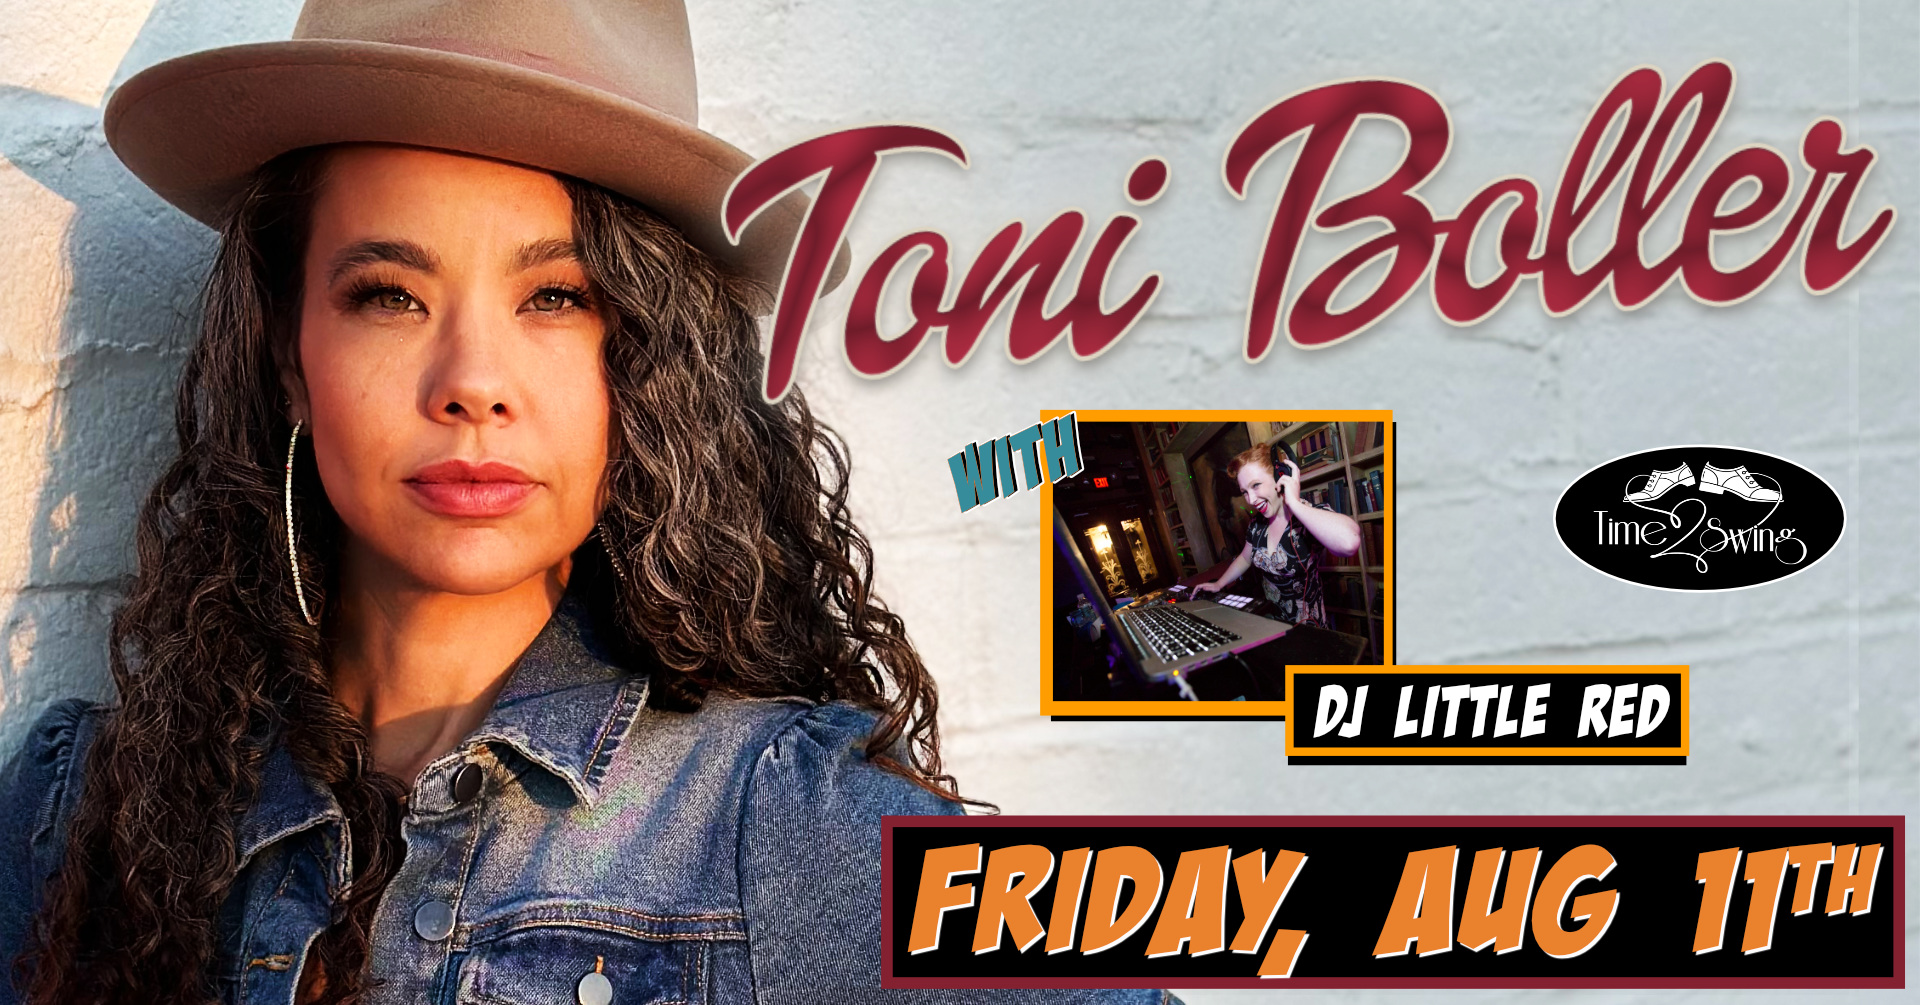 TONI BOLLER returns to The Moose with DJ LITTLE RED!